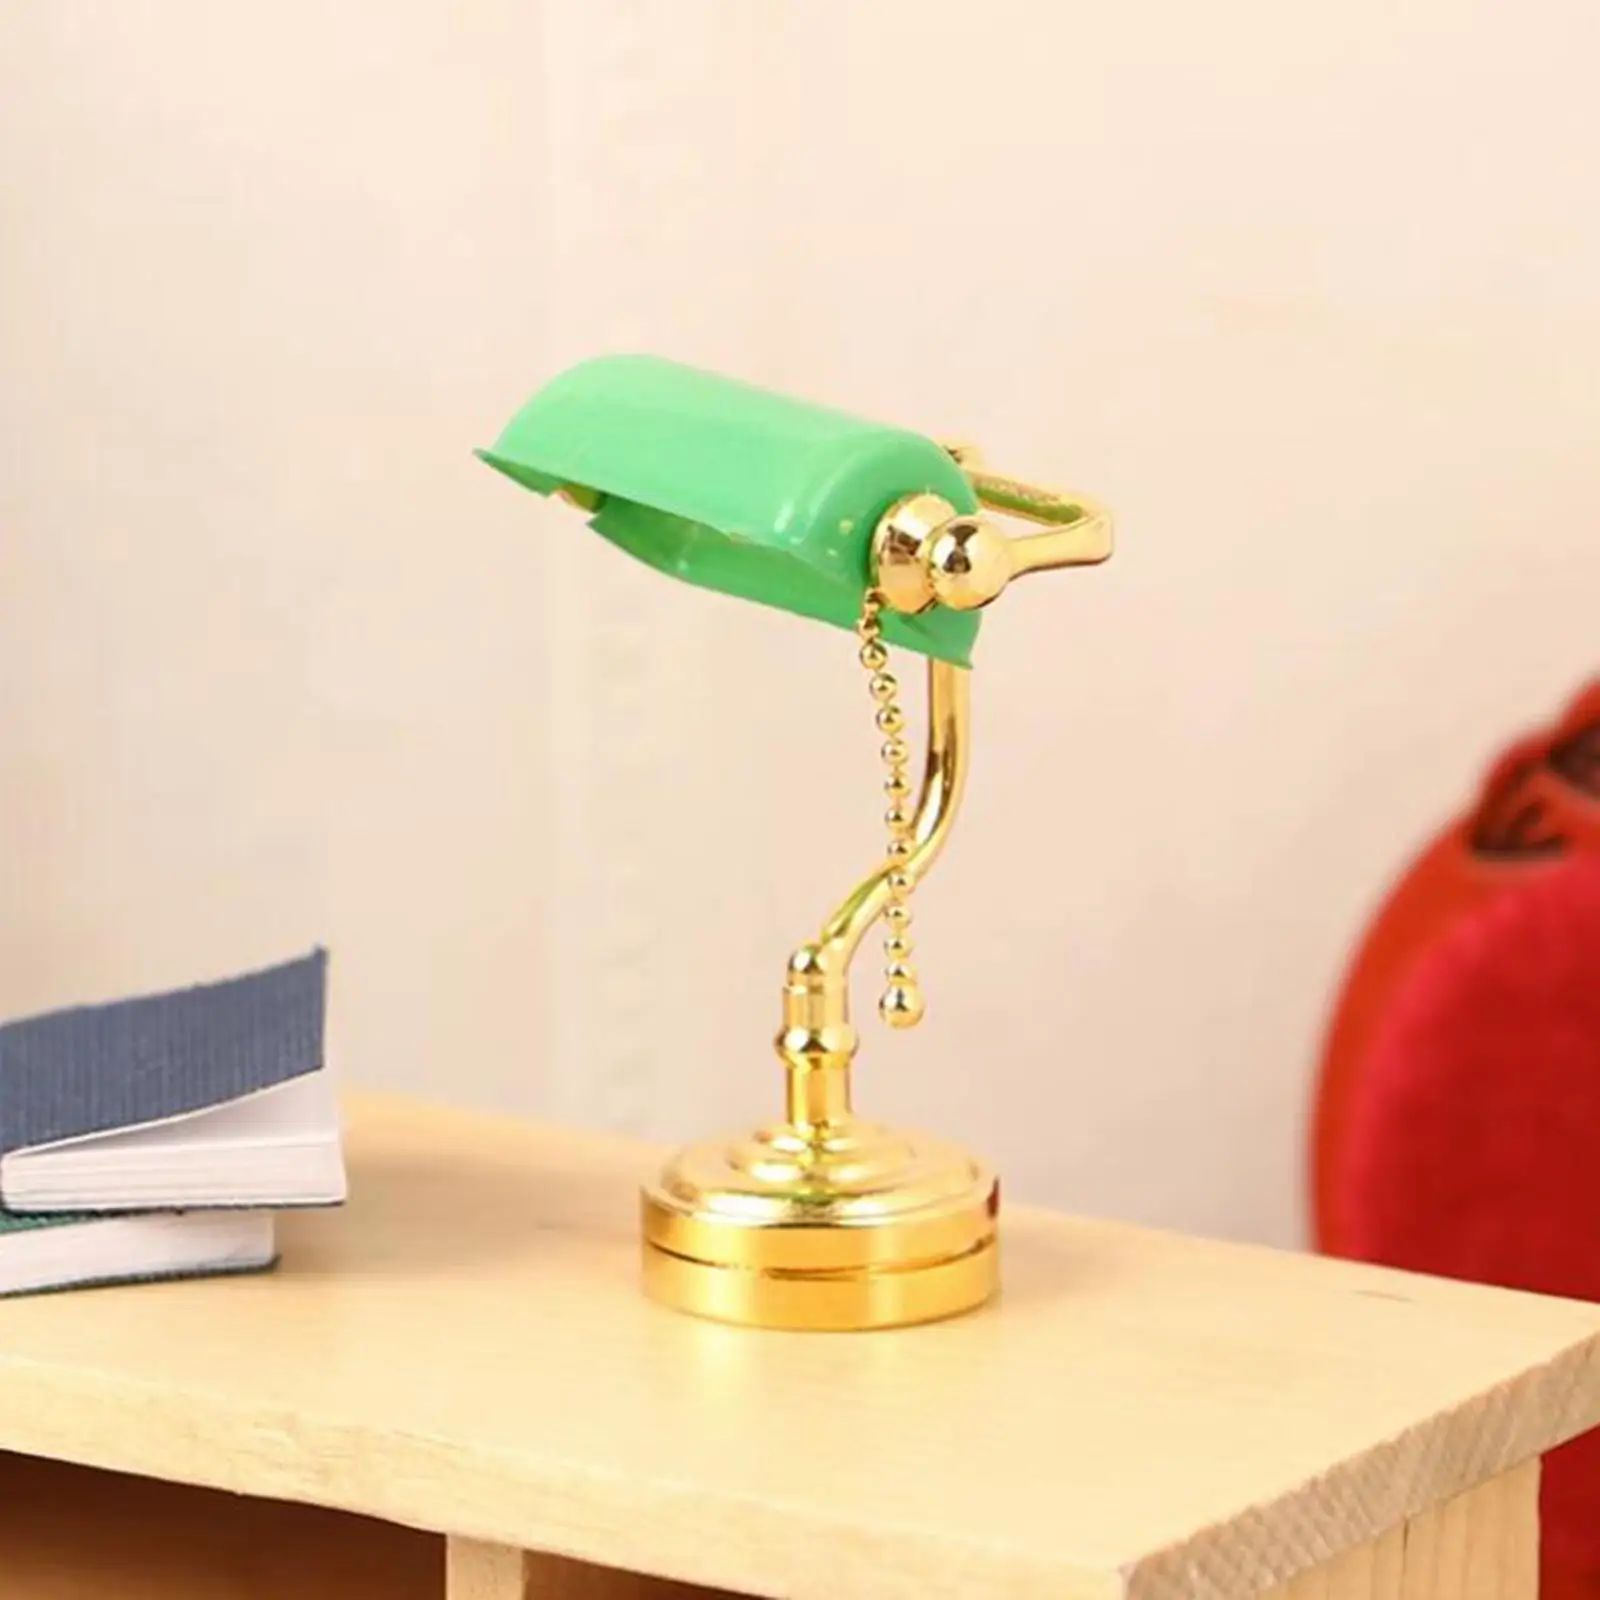 Dollhouse Table Lamp Retro Alloy Model 1/12 Miniature LED Lamp for Accessories Home Micro Landscape Bedroom Scenery Supplies